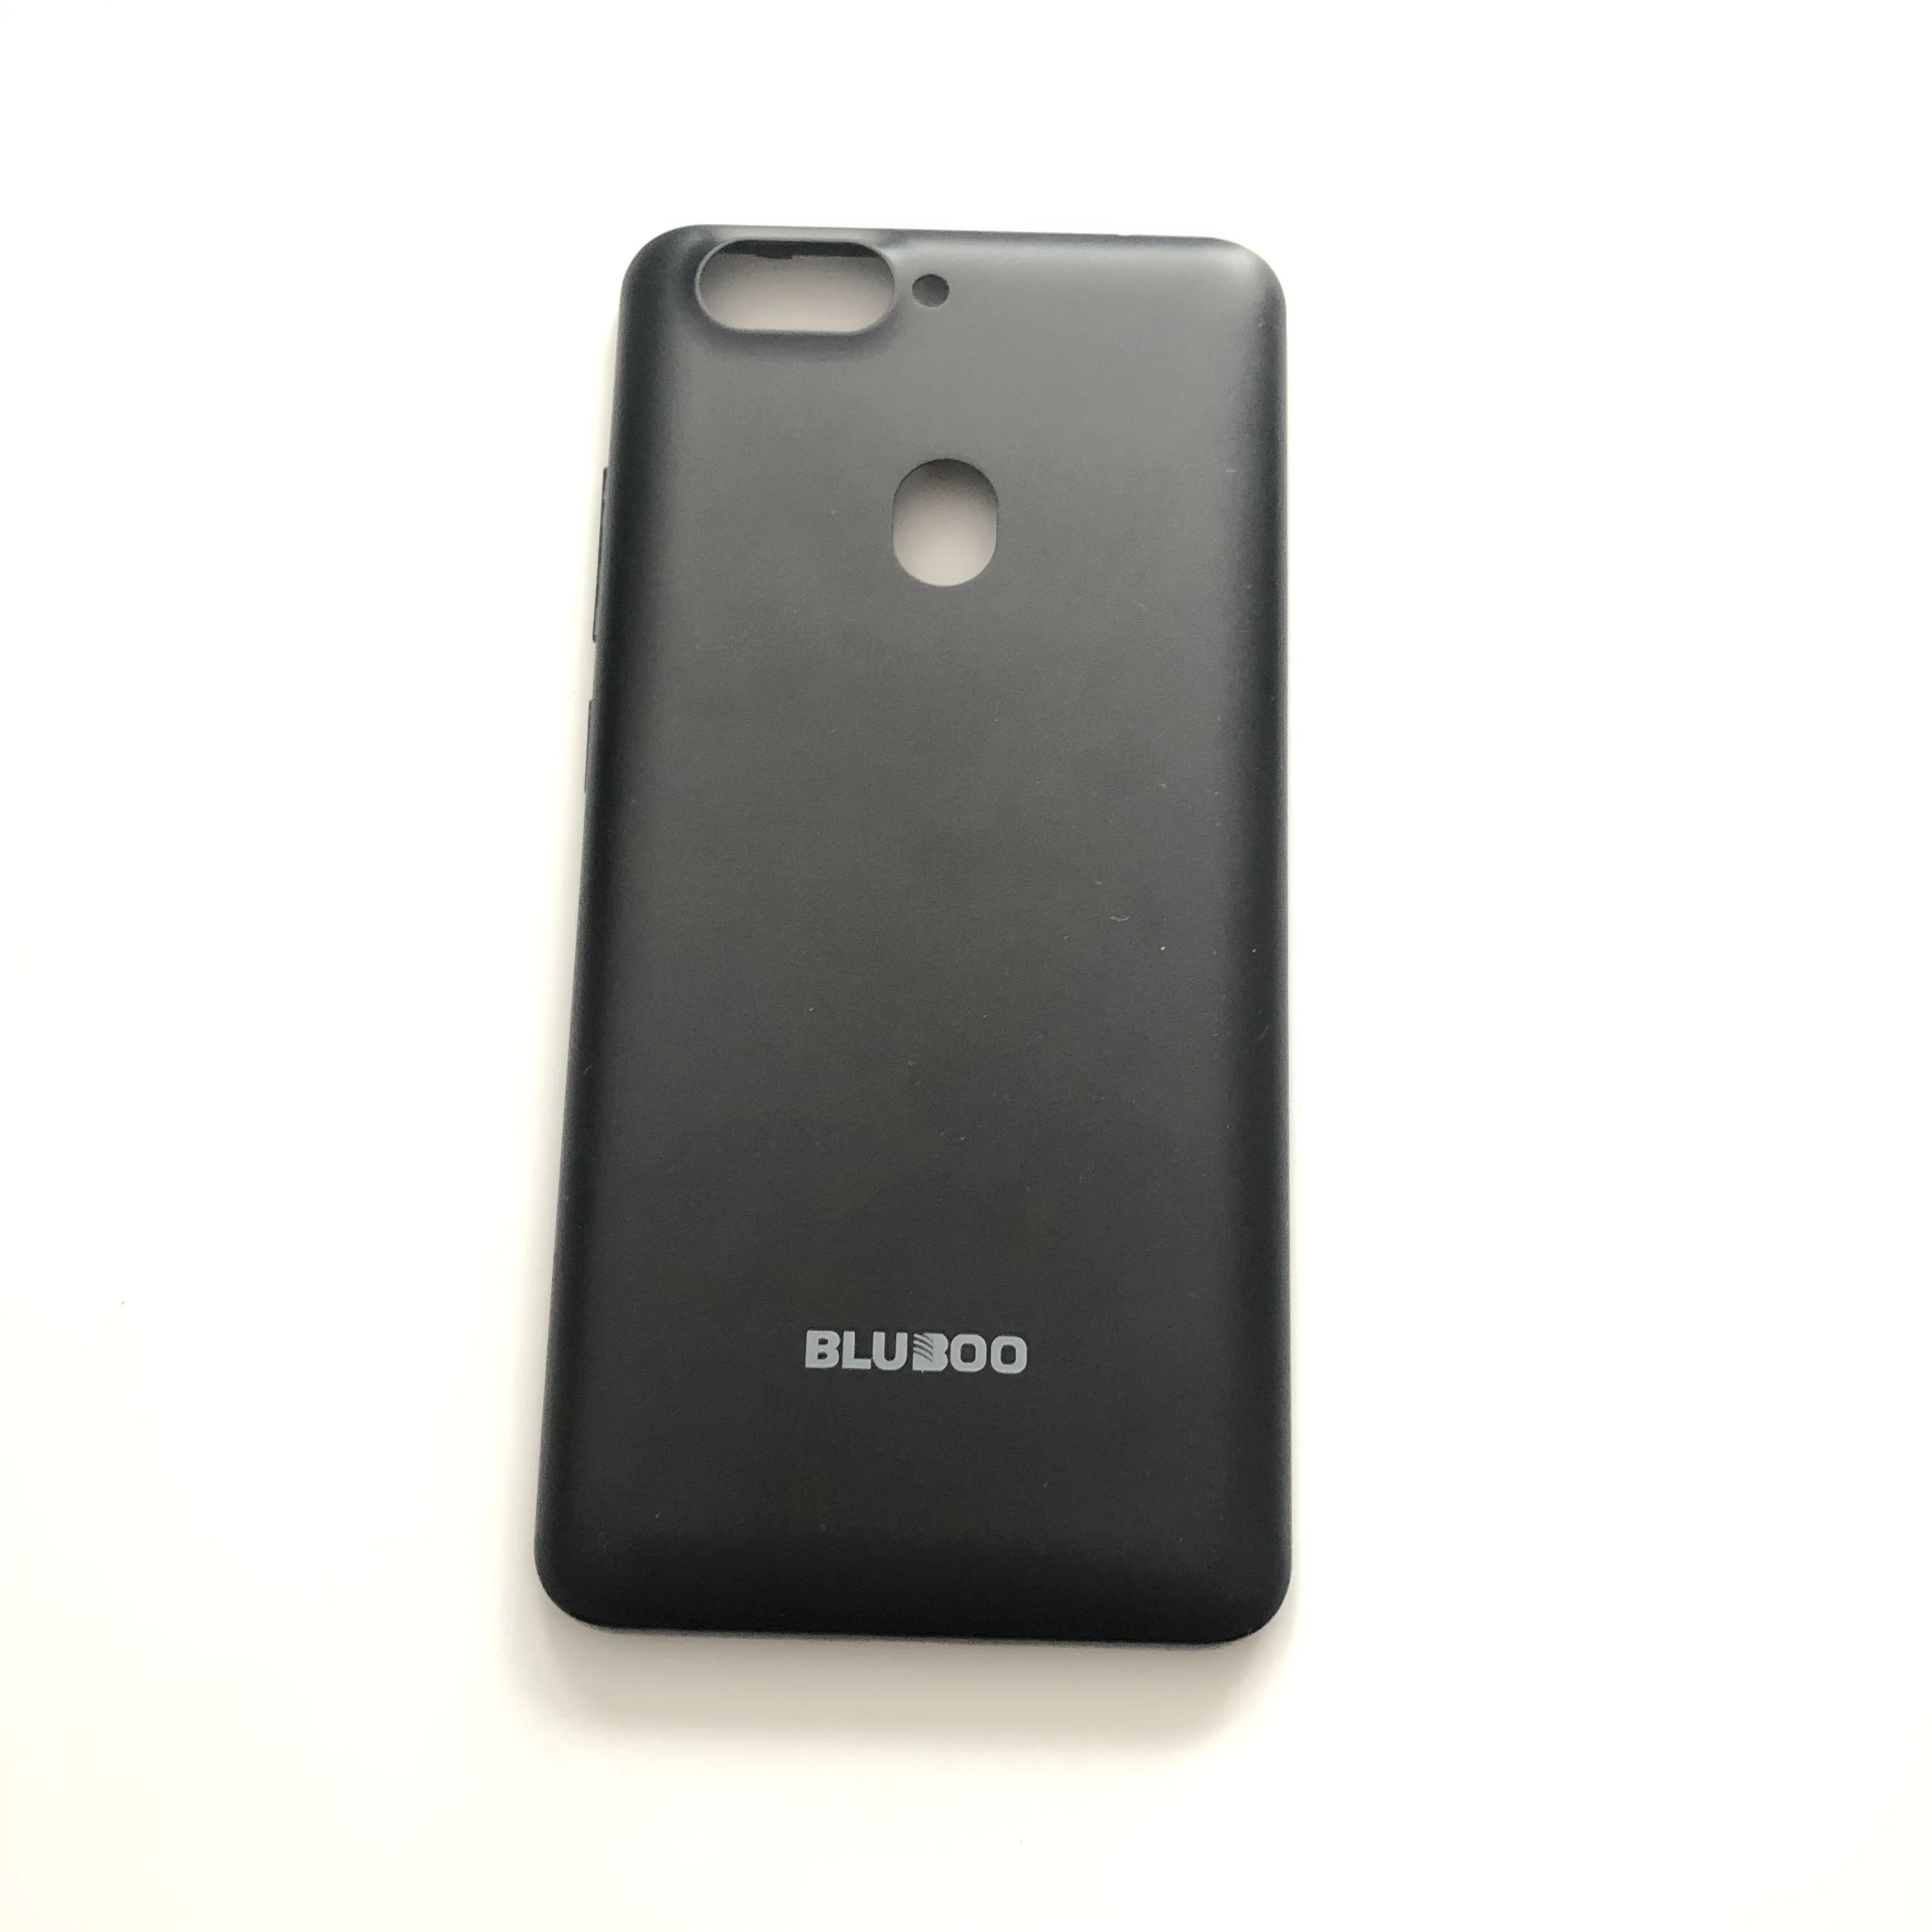 

BLUBOO D6 Used Protective Battery Case Cover Back Shell For BLUBOO D6 MT6580A Quad-core 5.5 inch 480*960 Smartphone